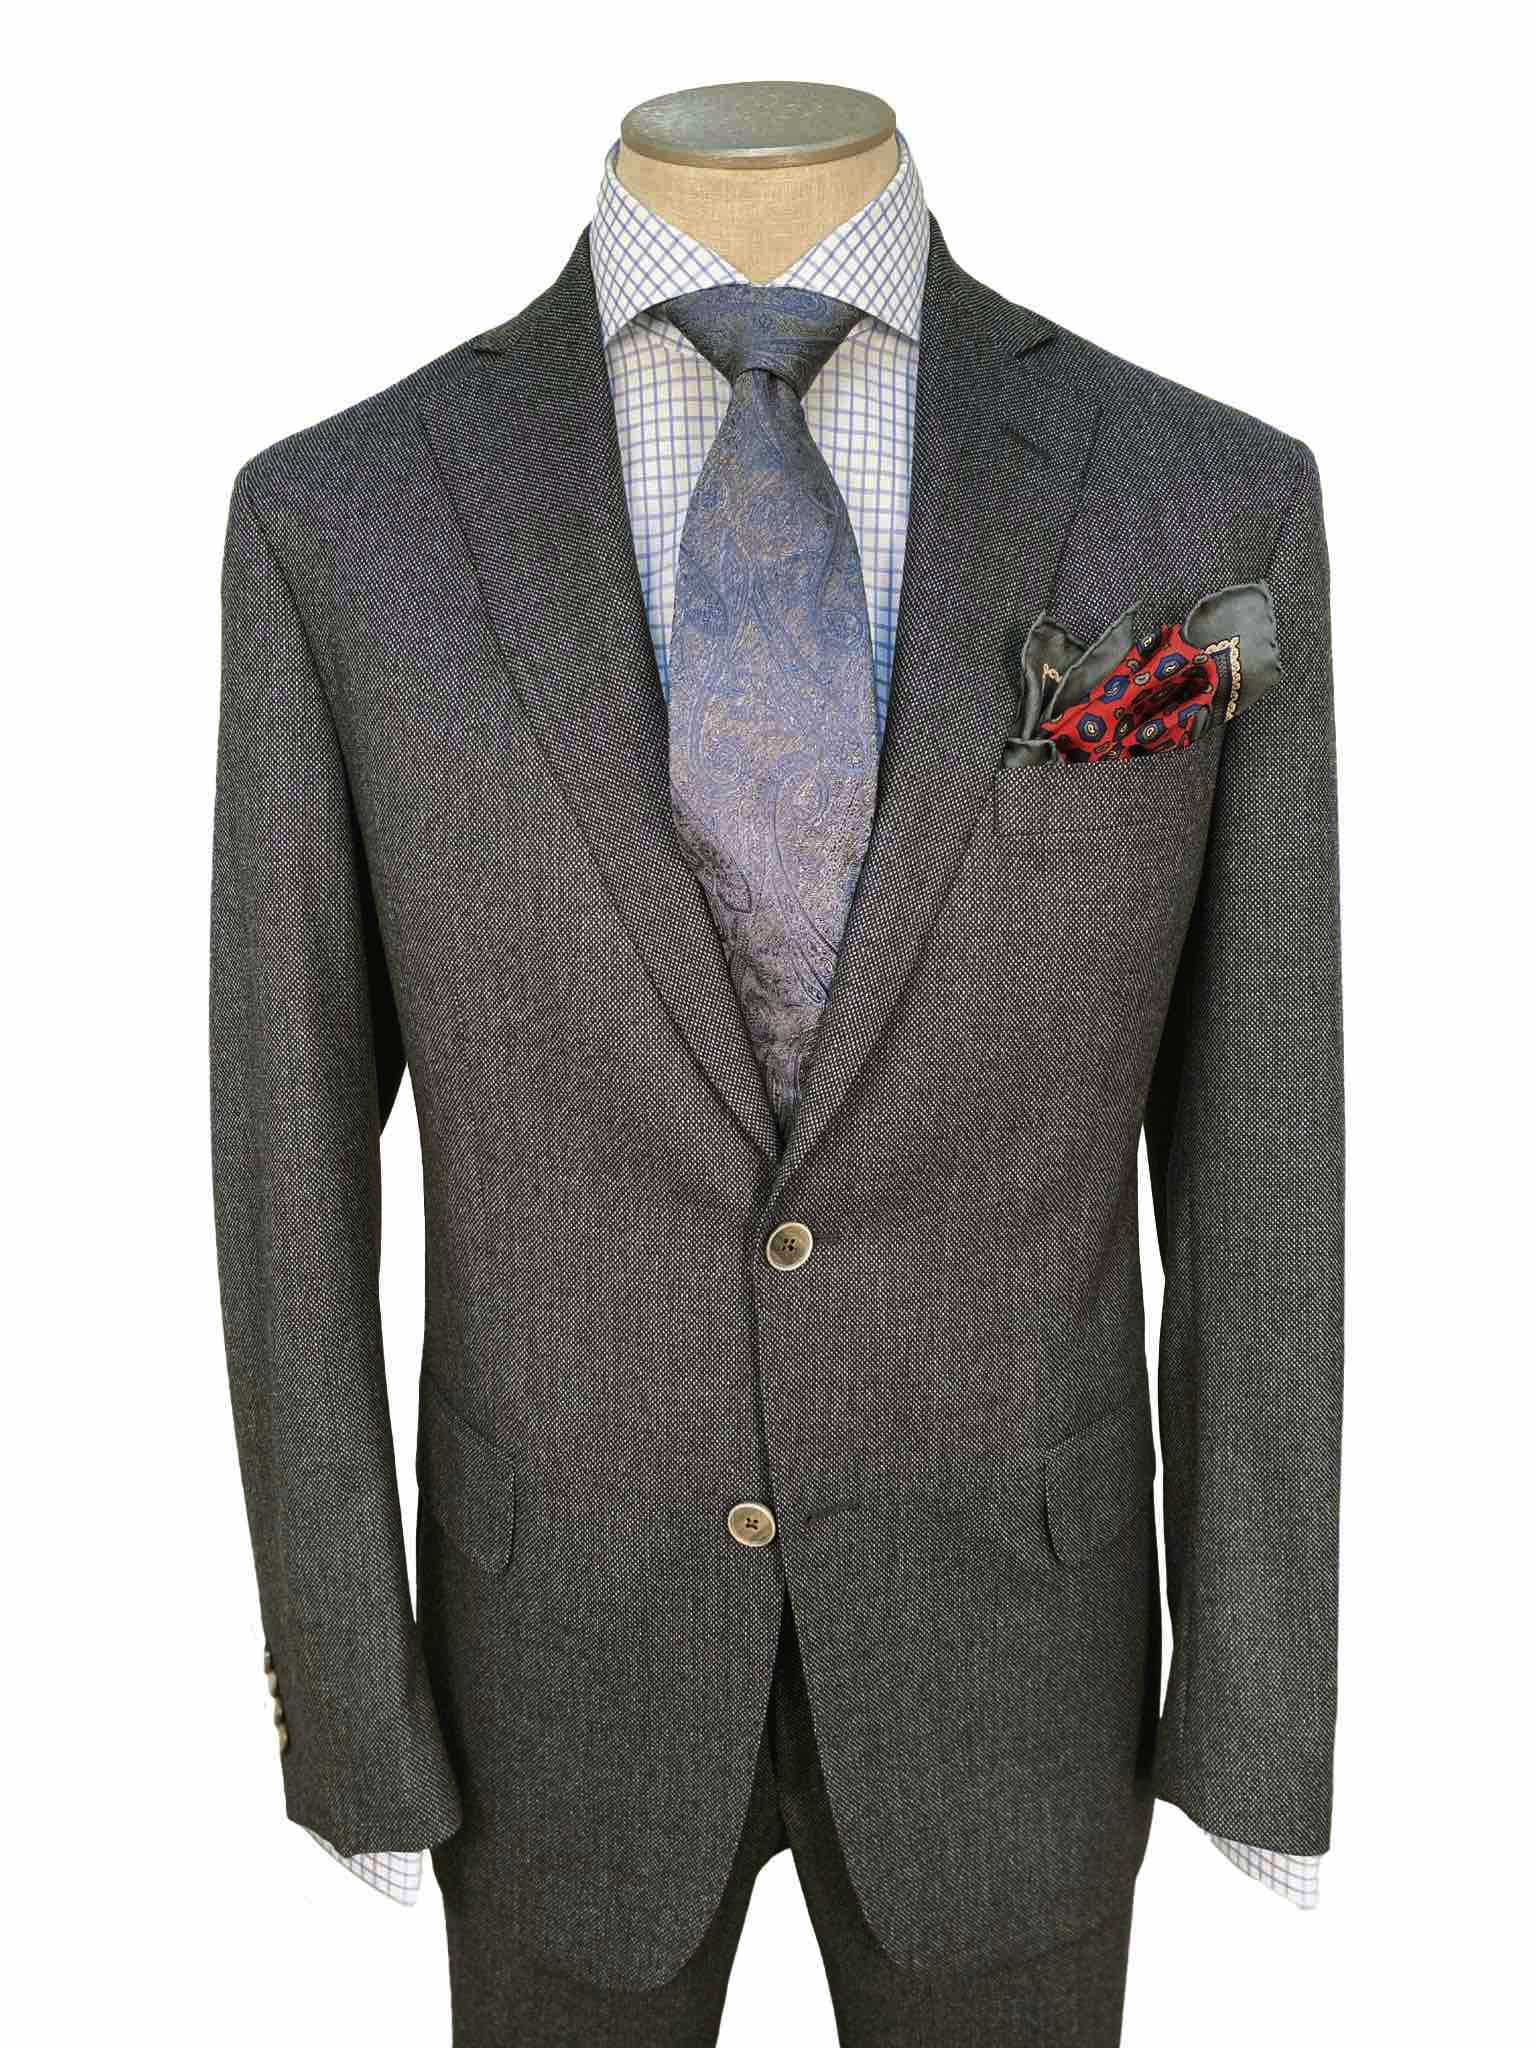 Men's Flat Front Pant Nested Suit Modern Cut - GREY 100% WOOL